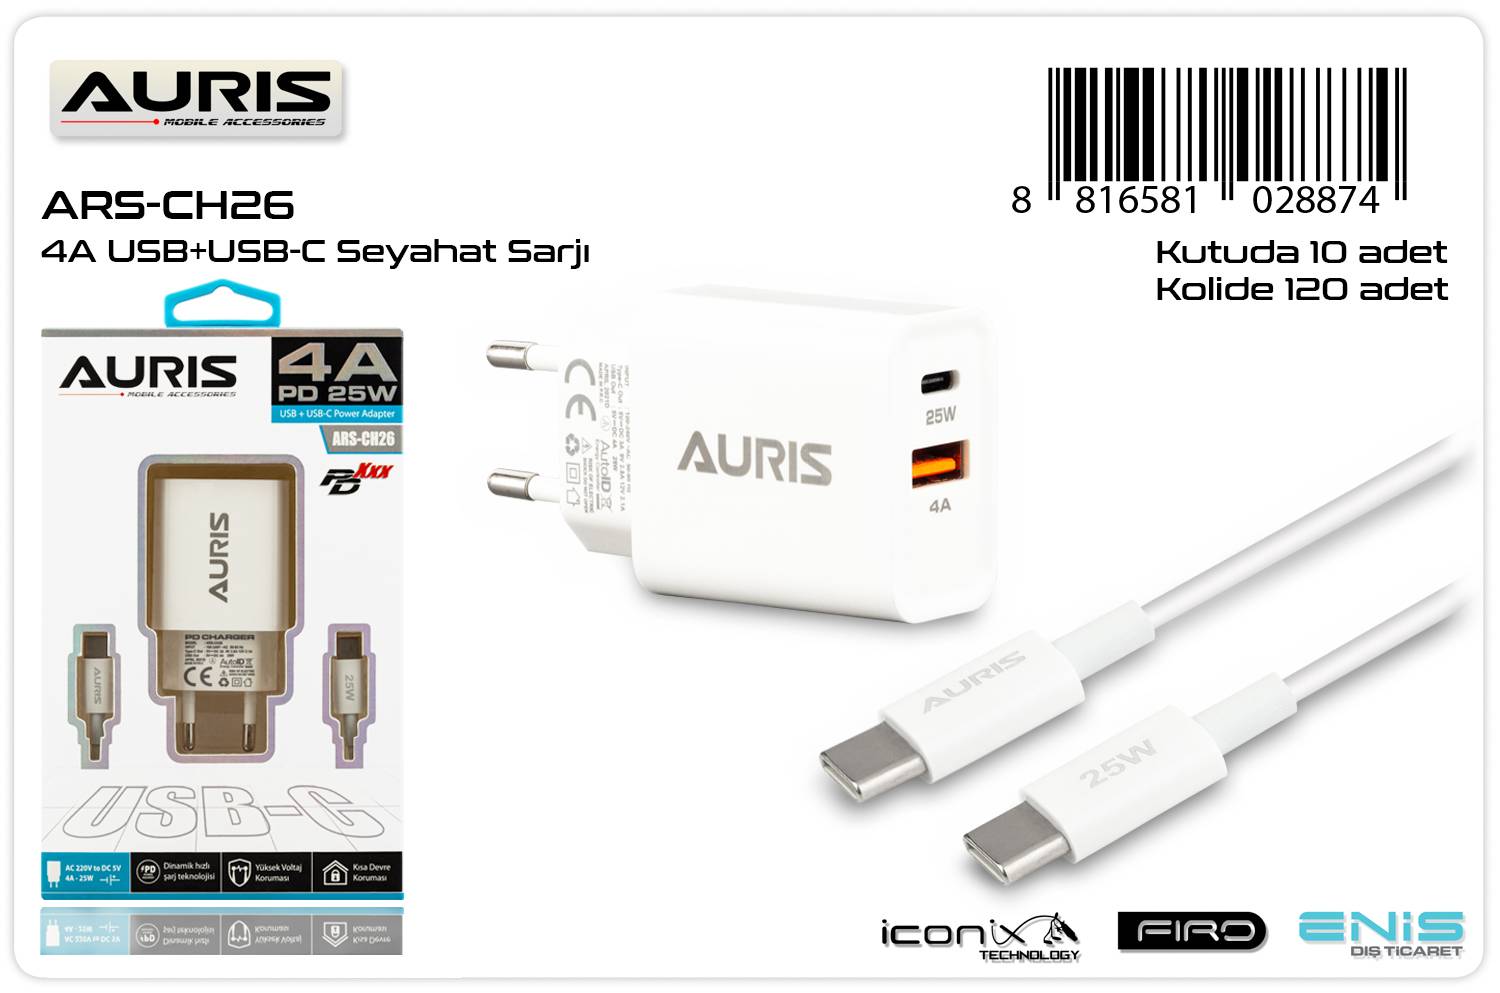 4A USB+USB-C CHARGER SET 2 IN 1 "AURIS" TYPE C TO TYPE C